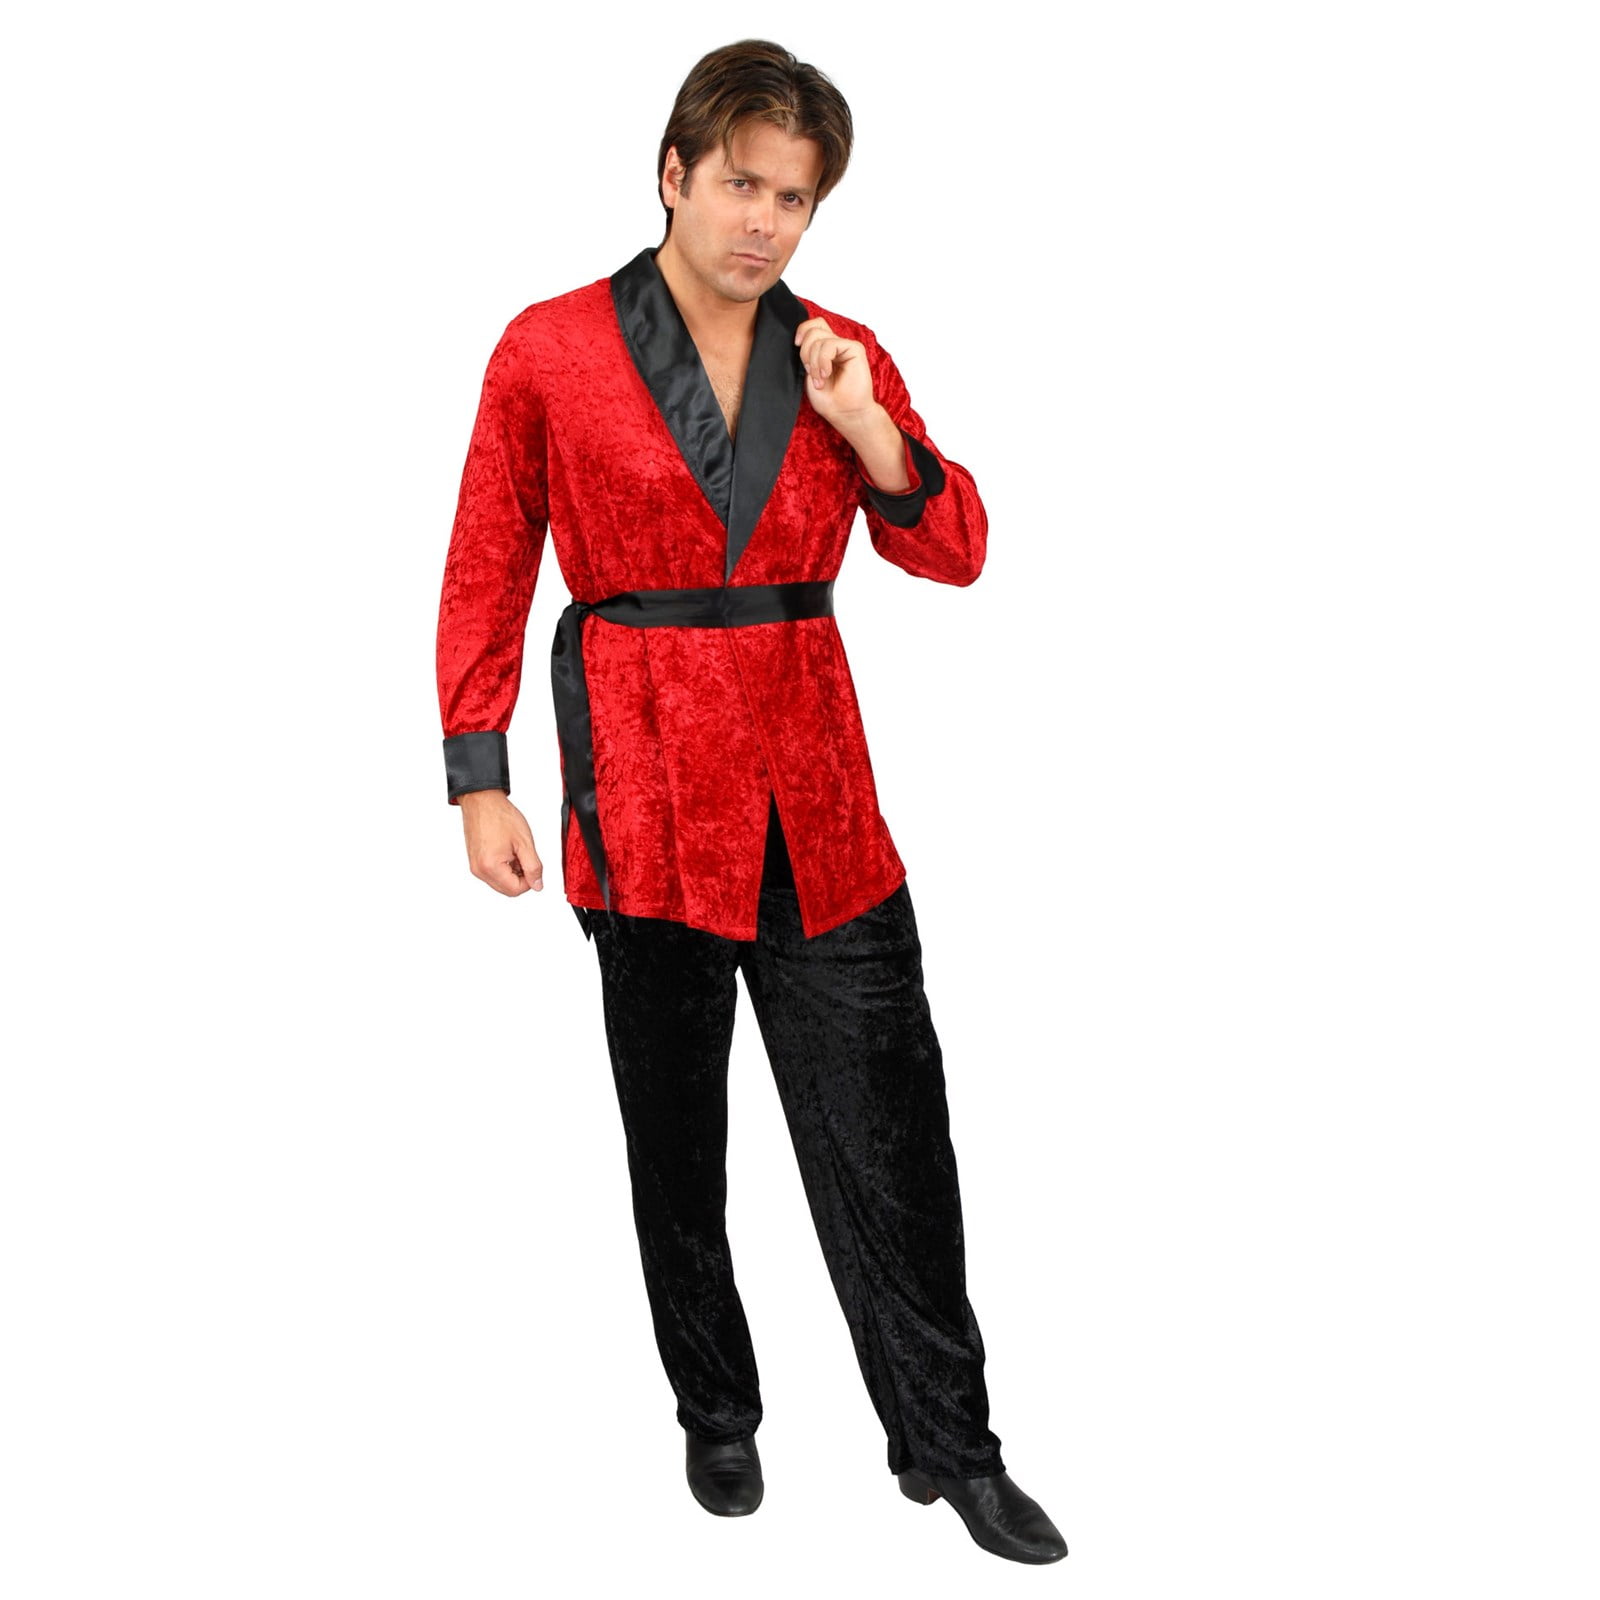 Charades Costumes 274999 Halloween Red Smoking Jacket - Extra Large